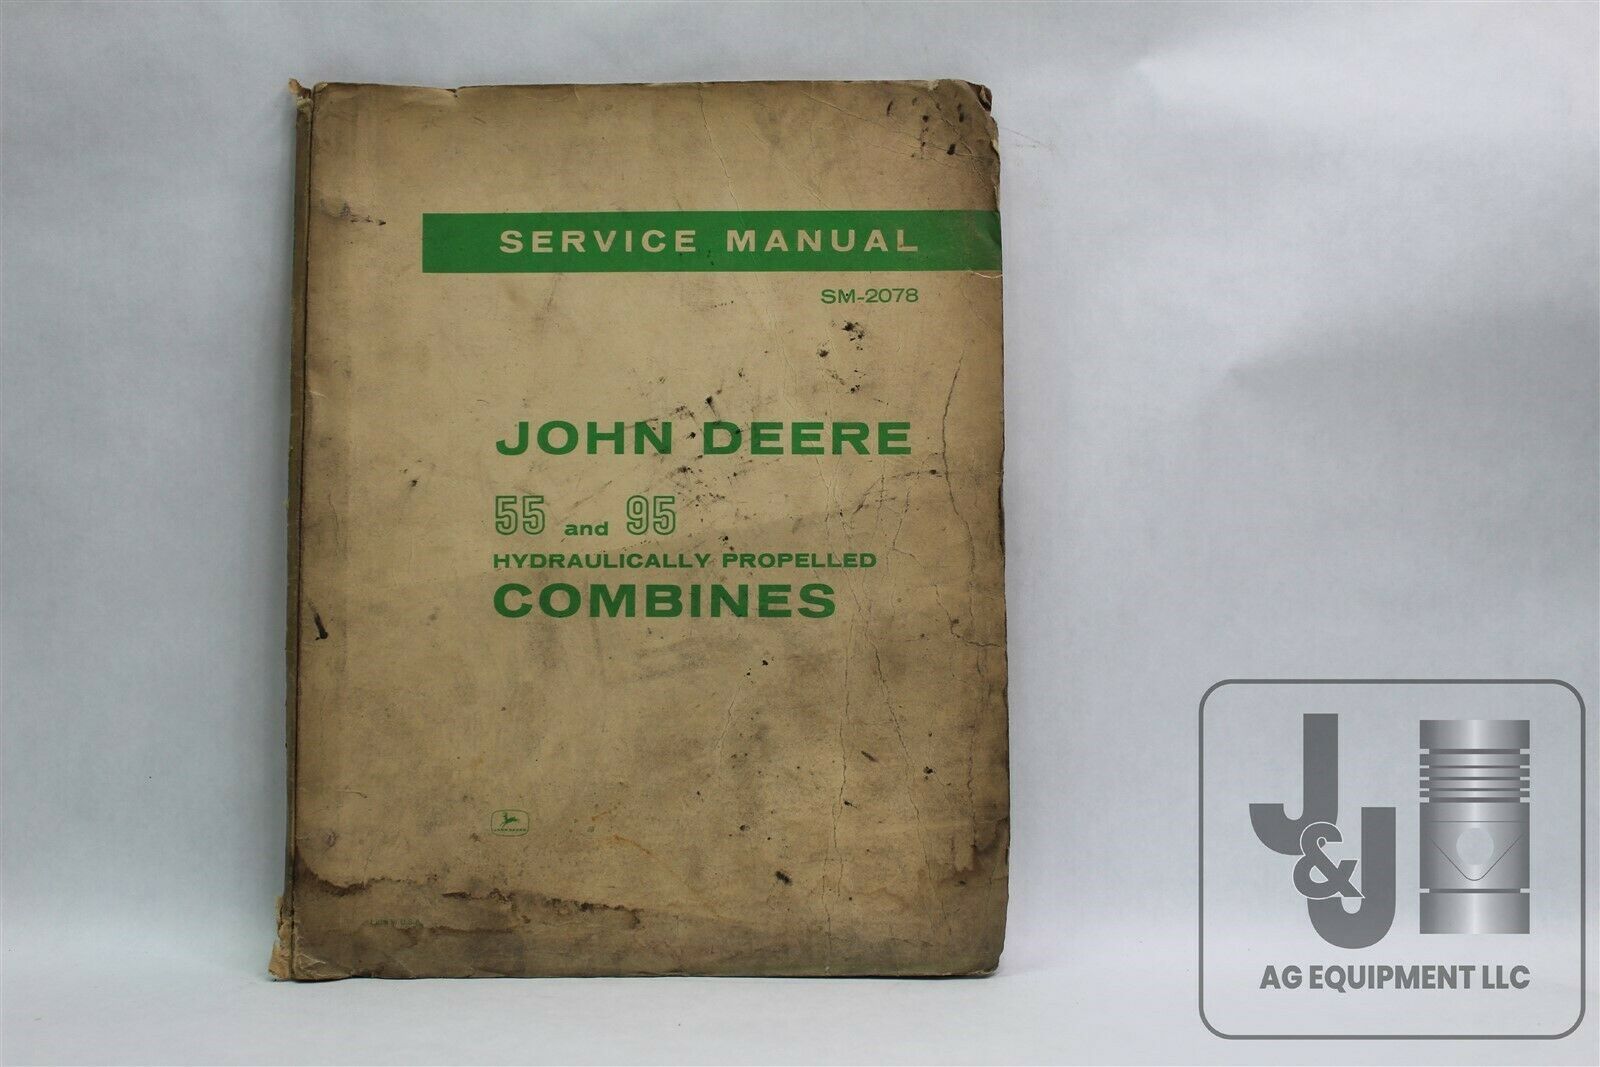 JOHN DEERE 55 &95 HYDRAULICALLY PROPELLED COMBINES SERVICE MANUAL SM-2078